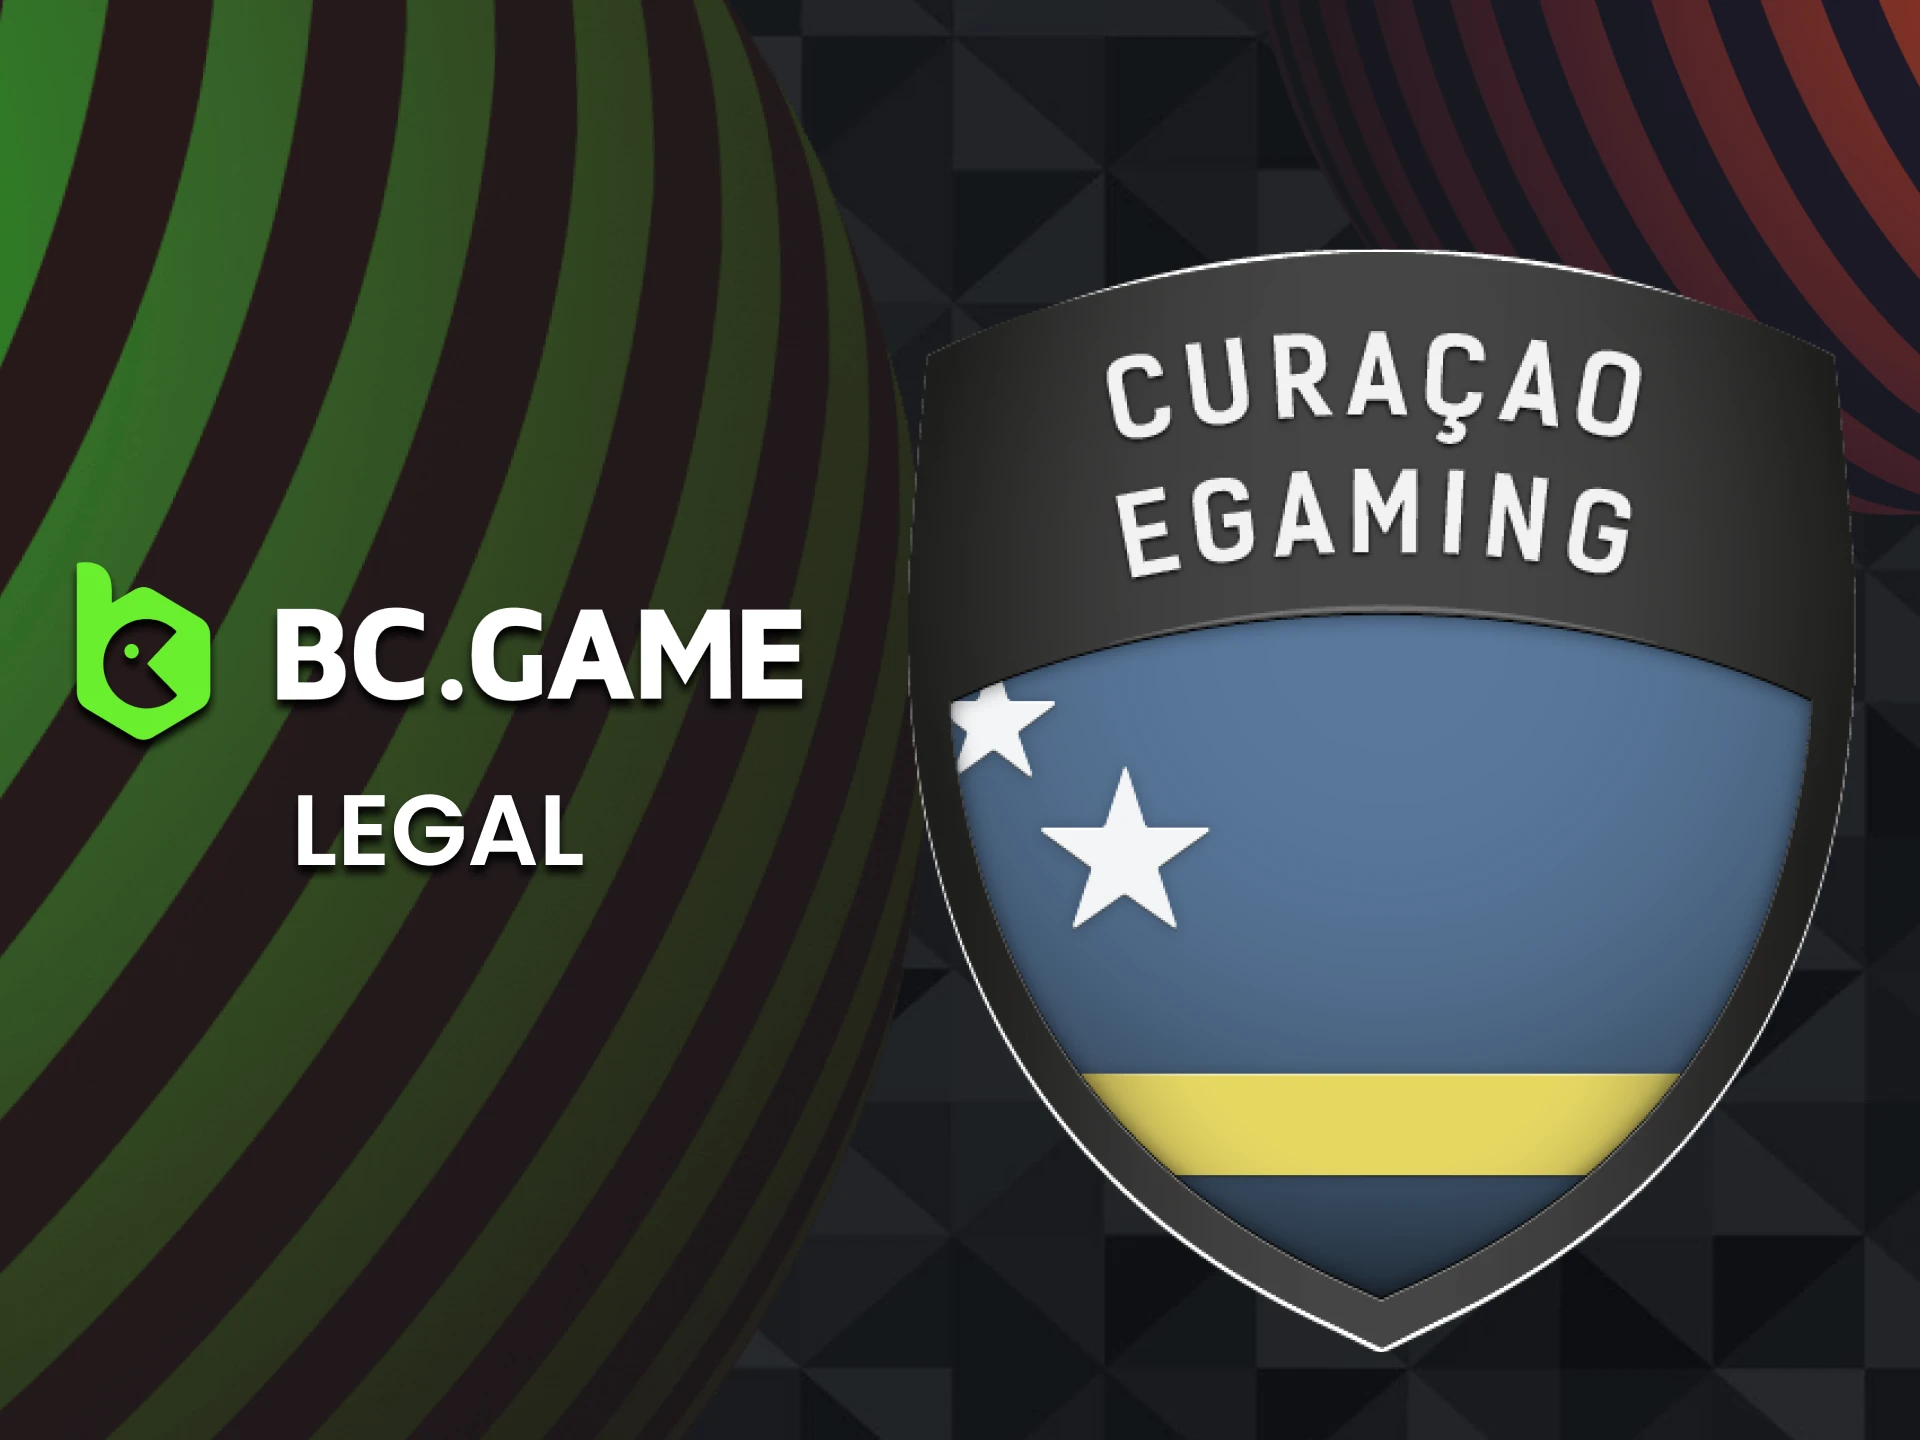 BC Game has an official Curacao license and completely legal in Bangladesh.